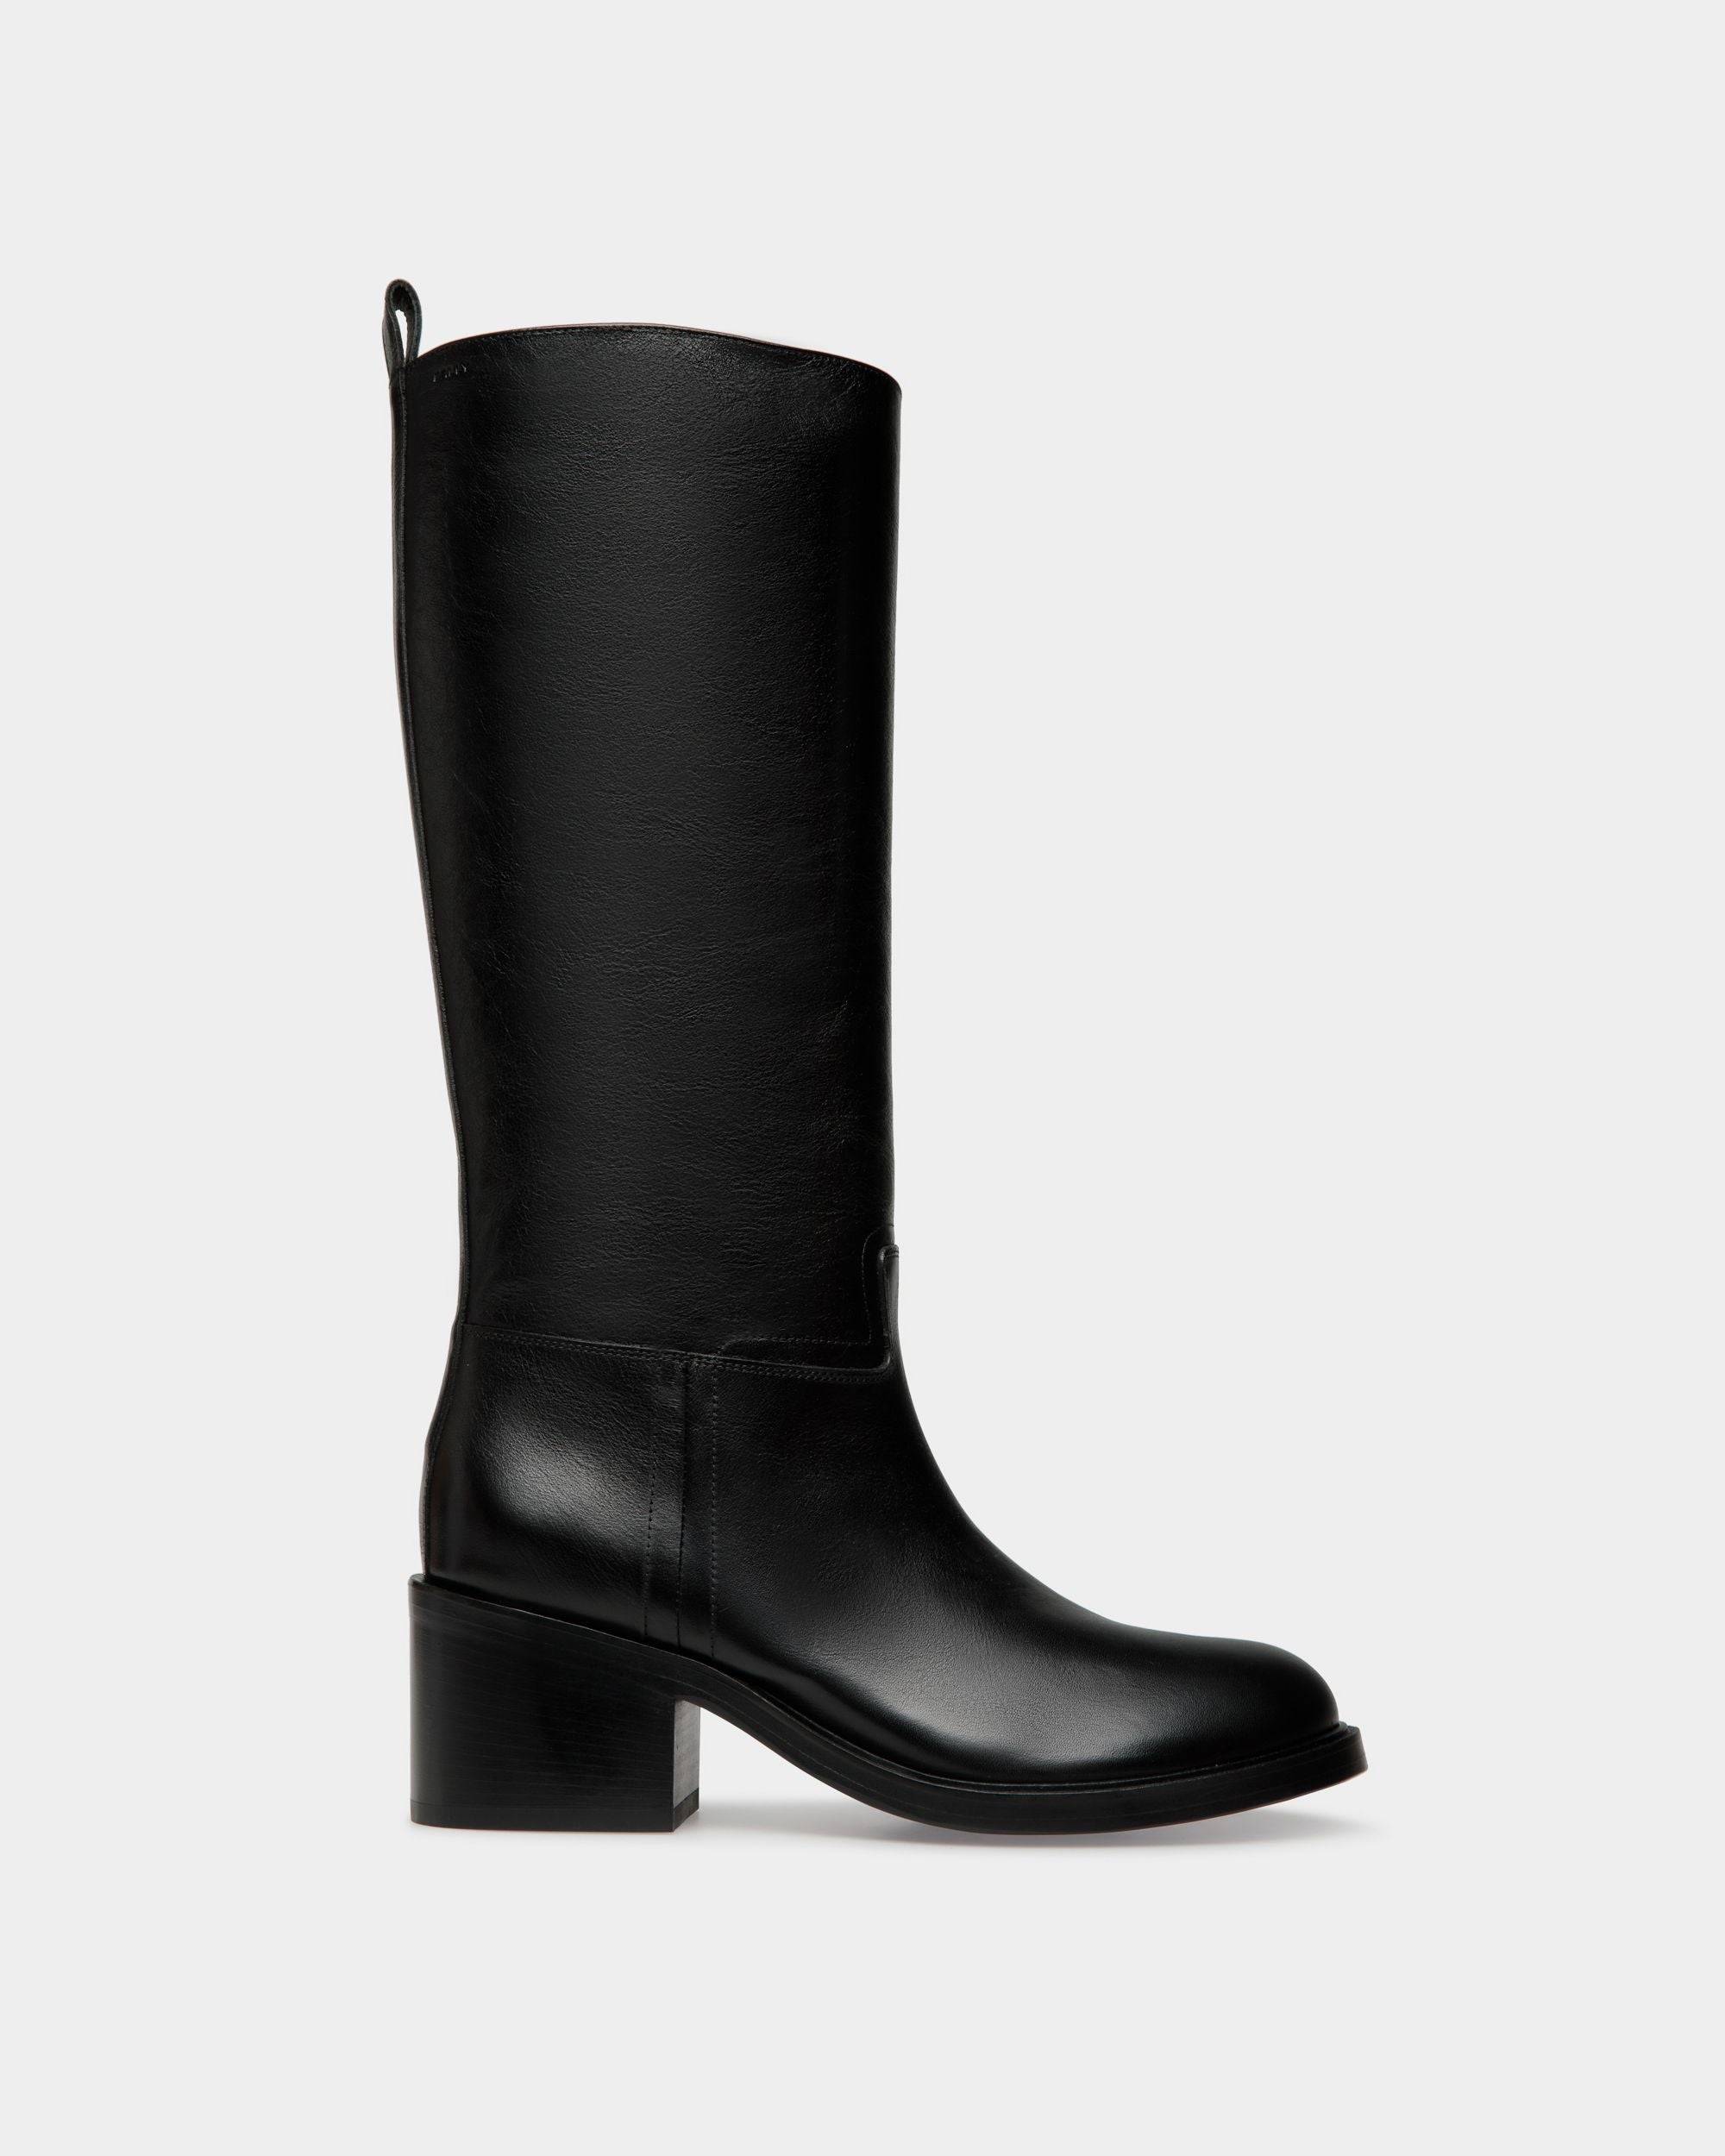 Peggy | Women's Boot in Black Leather | Bally | Still Life Side